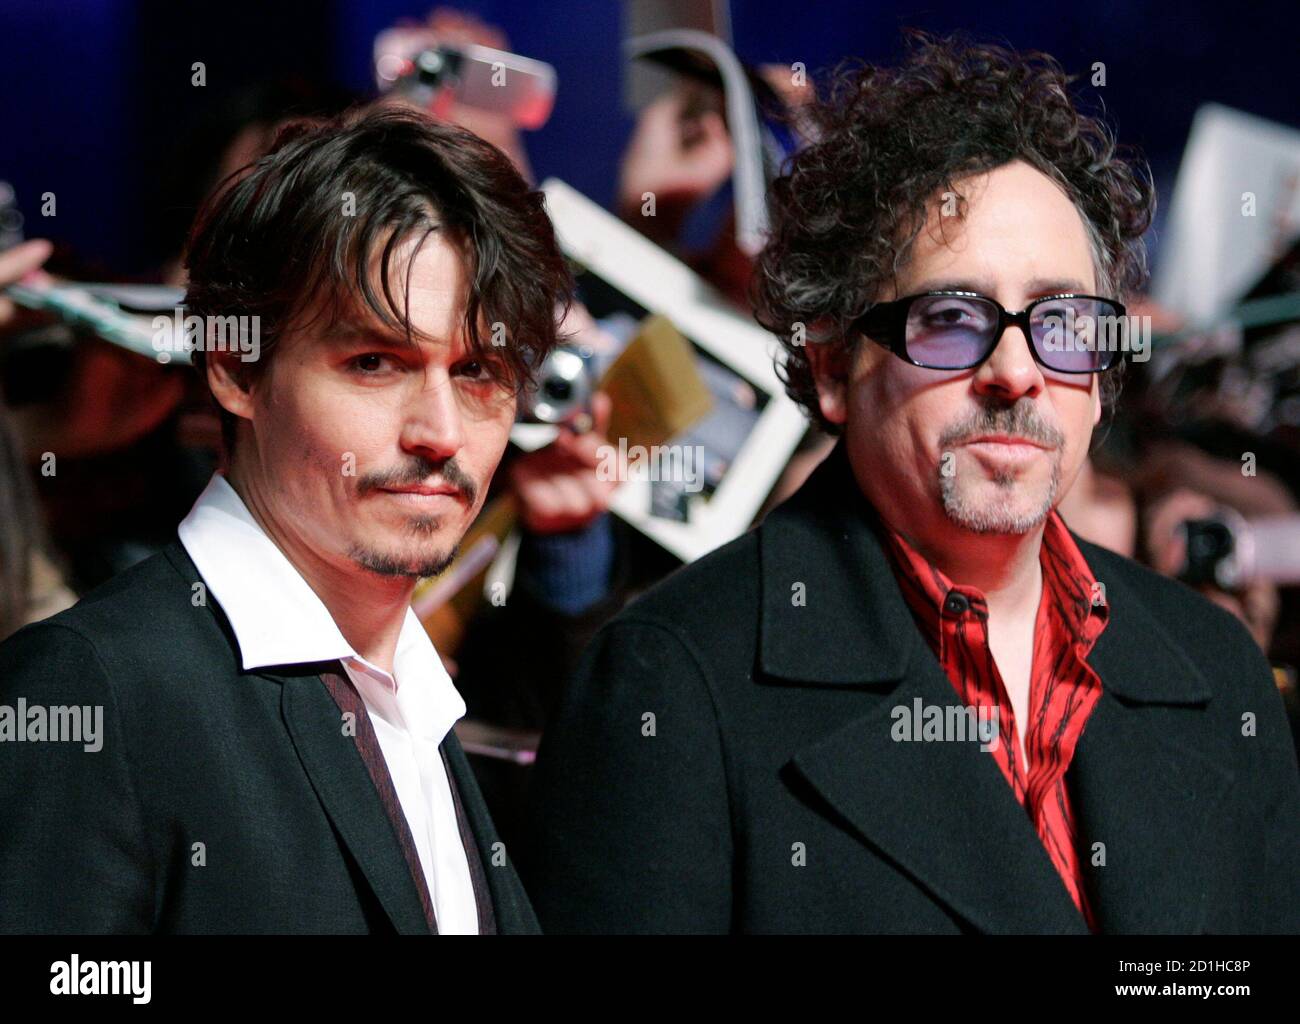 U.S. actor Johnny Depp (L) and director Tim Burton pose for photographers  as fans wave and take photos at a red carpet event in Tokyo January 8,  2008. Depp and Burton are